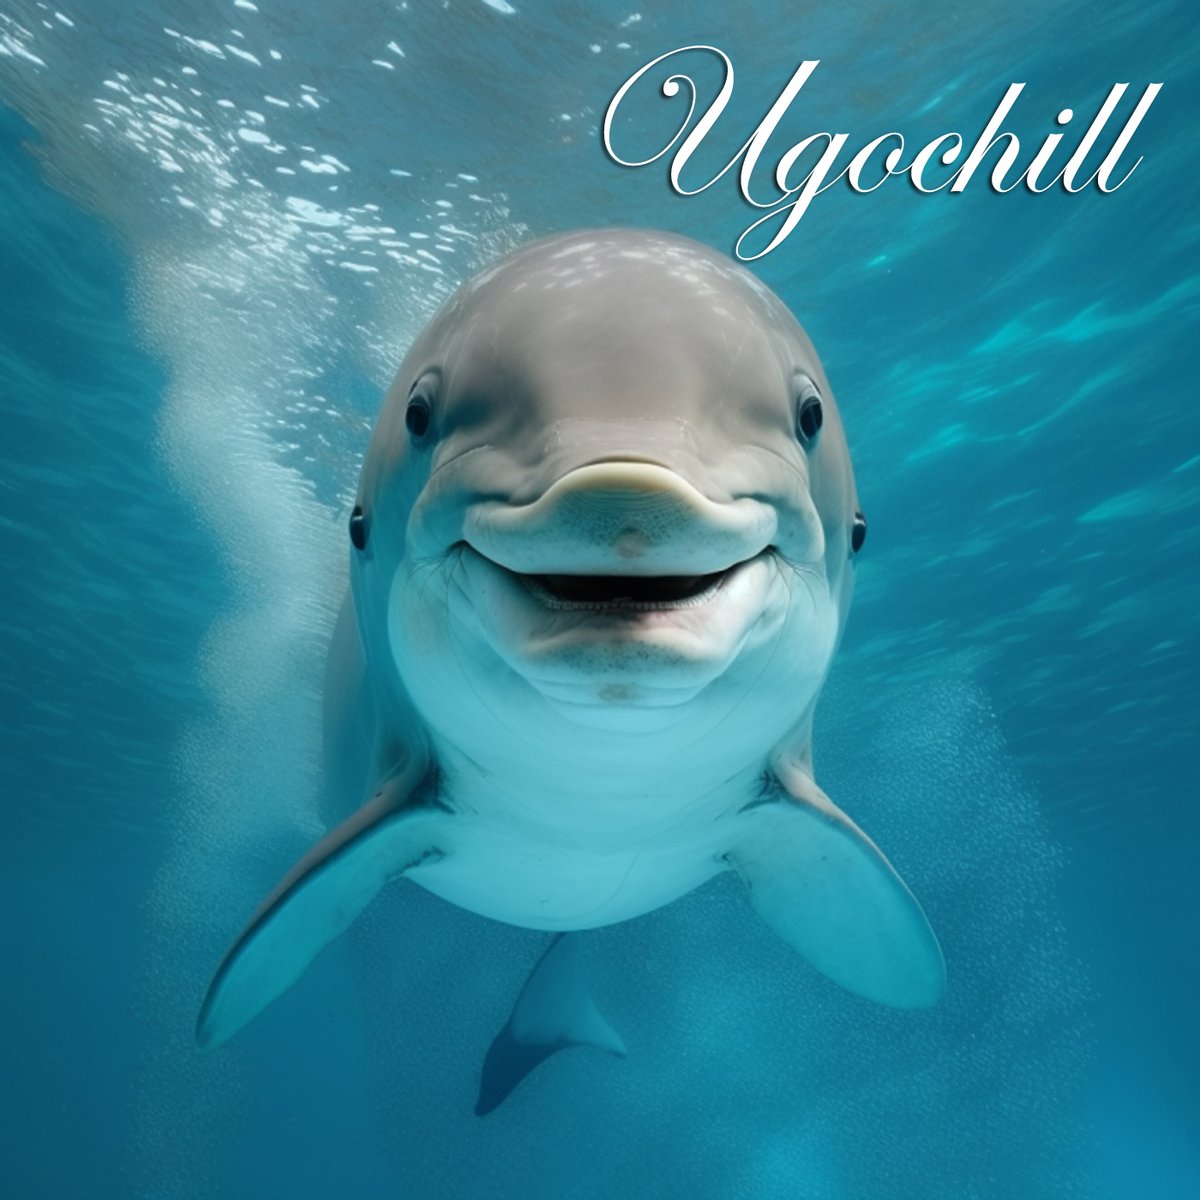 Ugochill Music #newsingle “The Whale Song” will be released on April 10th 2023.!
ugochill.bandcamp.com
#music #newmusic #newmusicsaturday #newmusicfriday #newmusicalert #newrelease #independentartist #independentmusic #rockmusic #alternativemusic